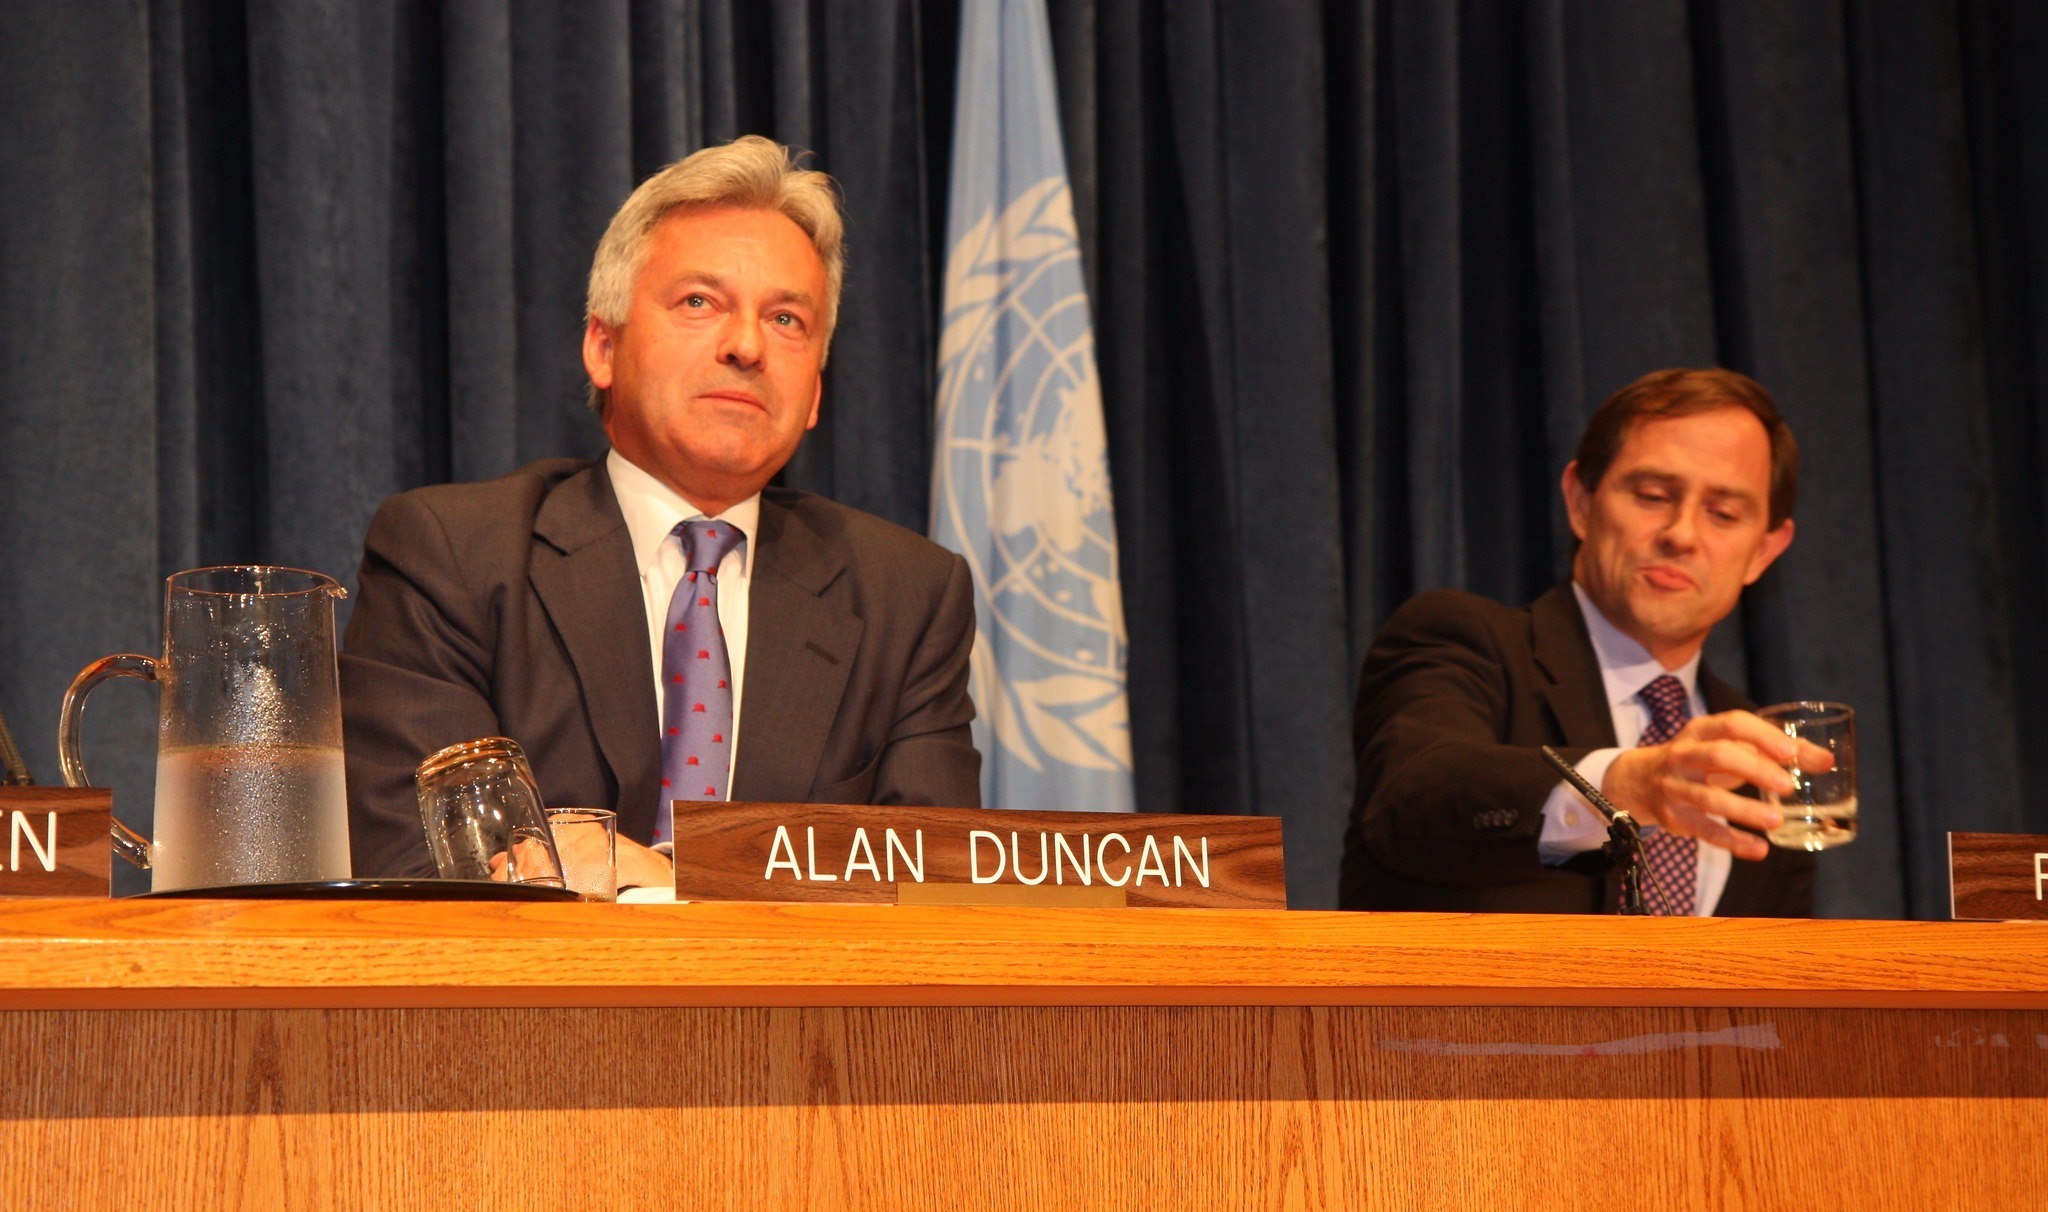 Alan Duncan speaks at the UN in New York in 2010 (Photo: UK government)